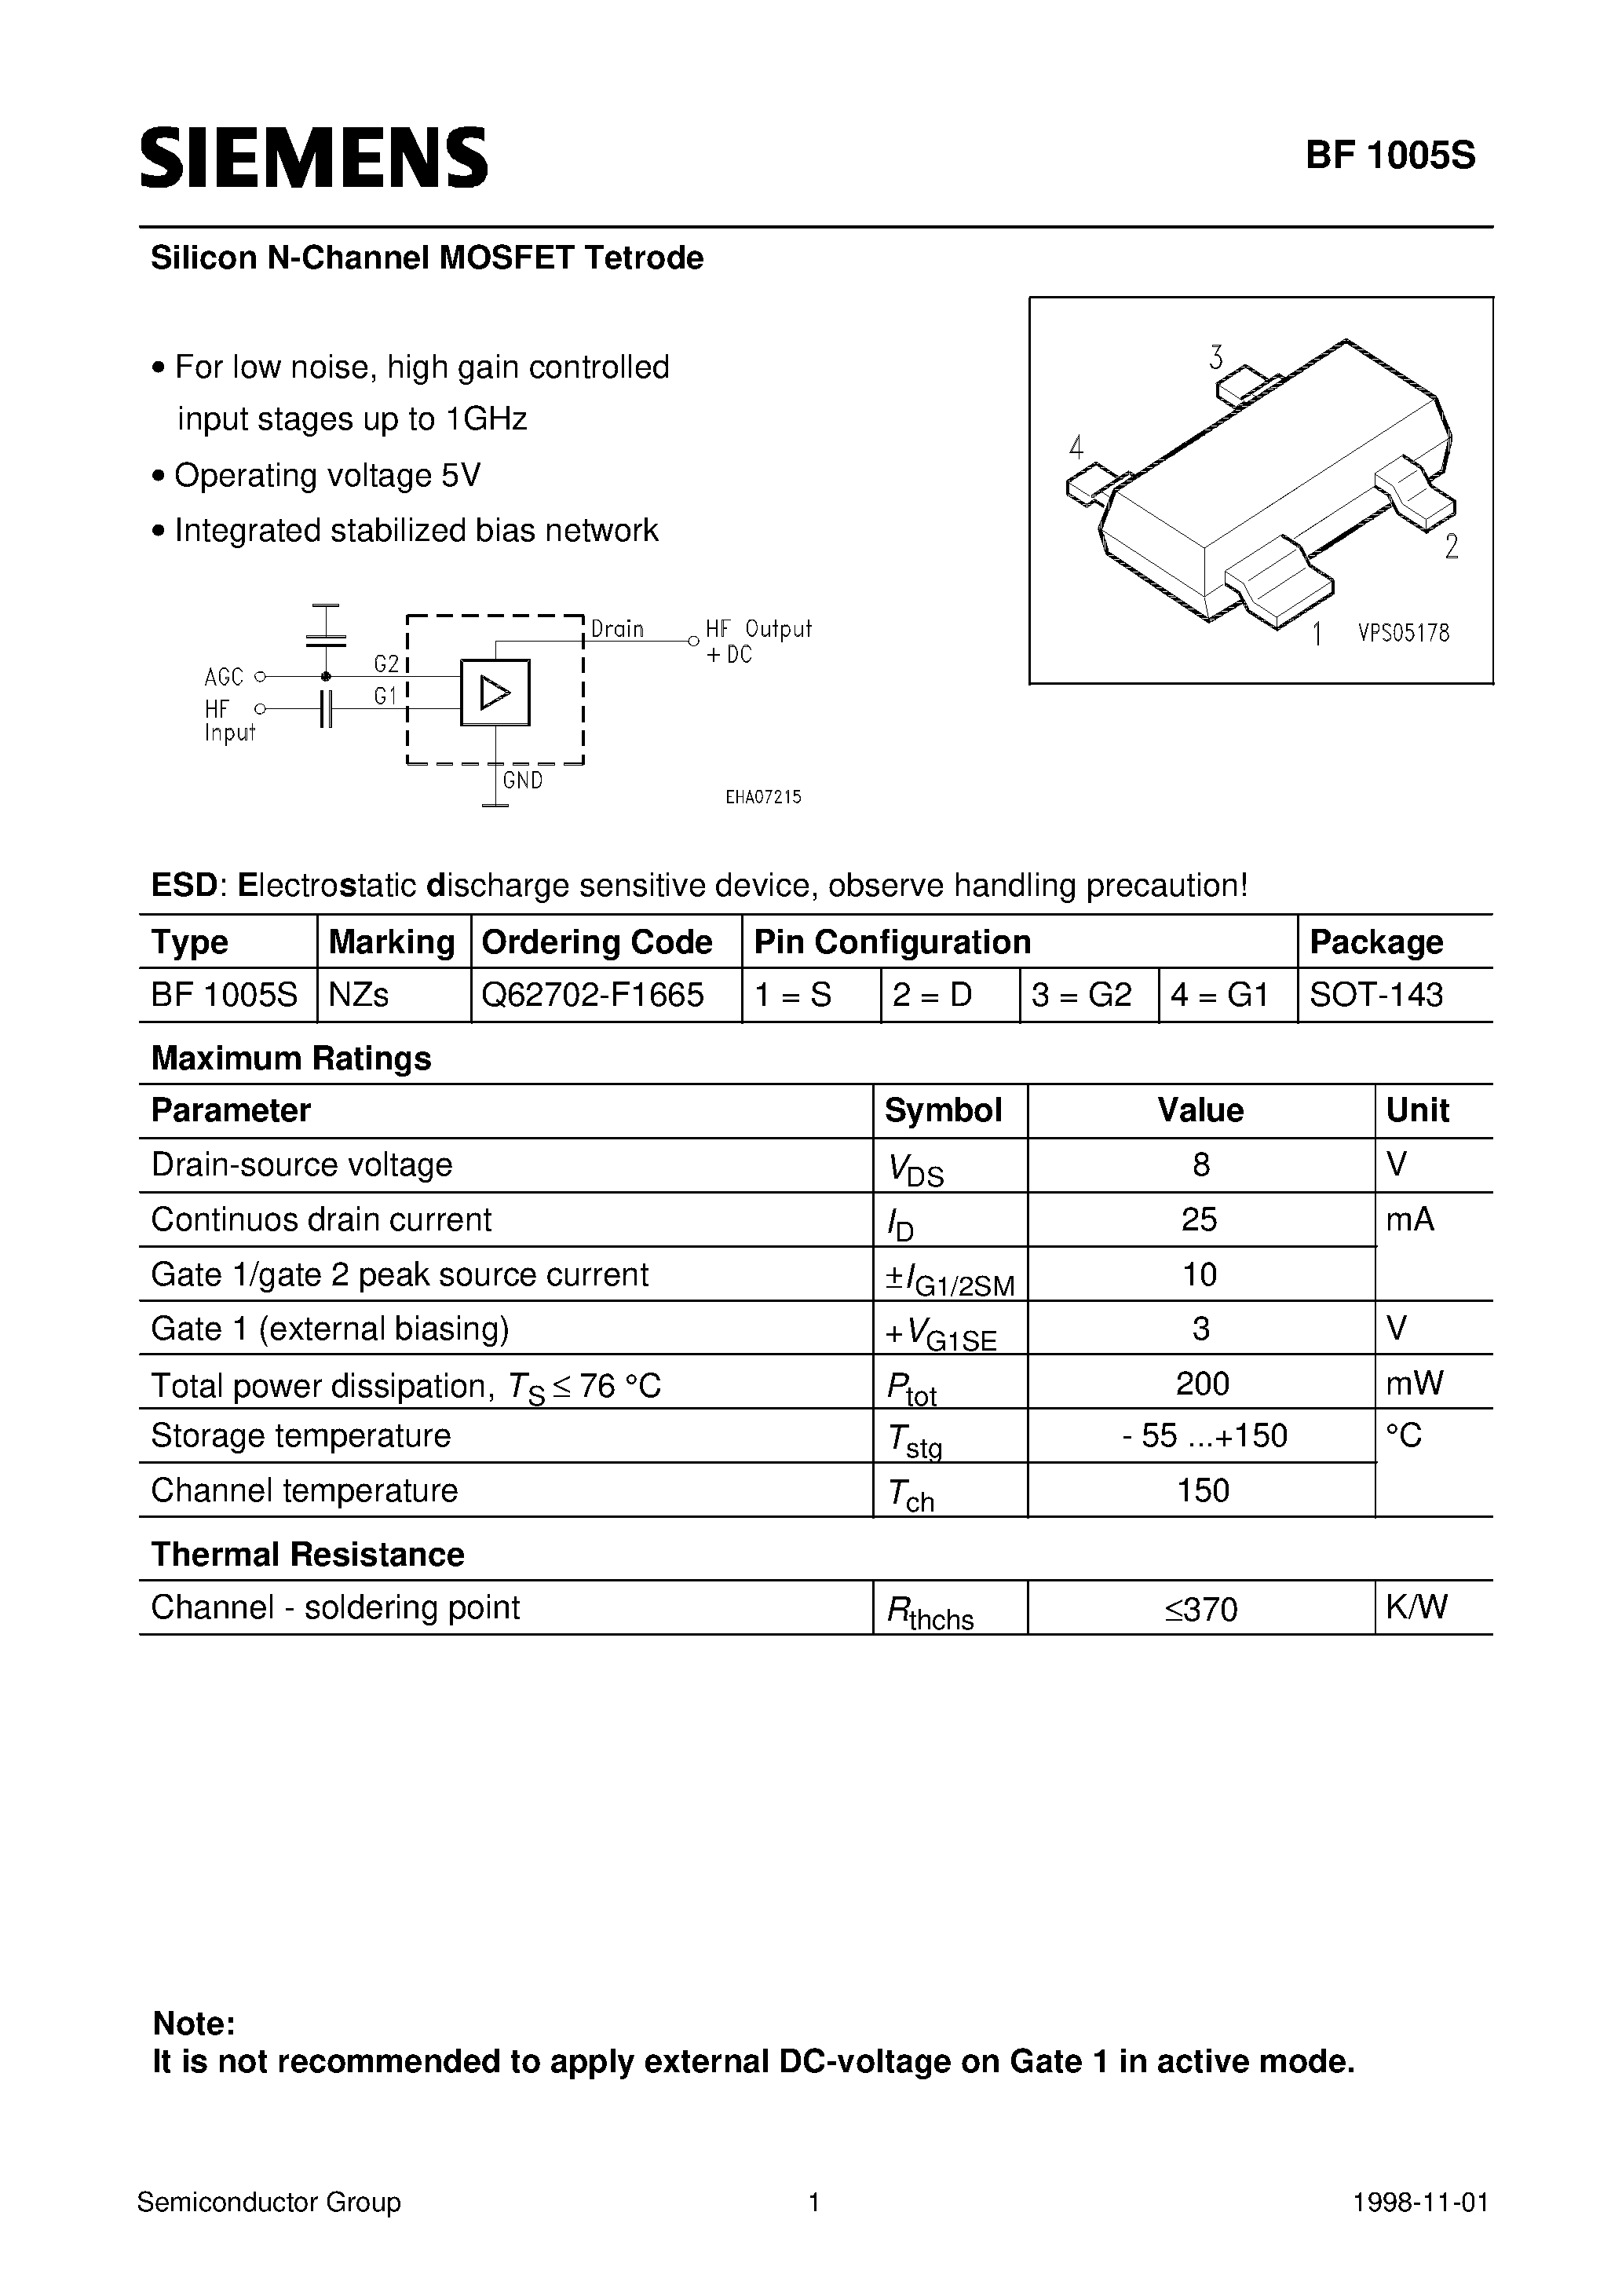 Даташит BF1005S - Silicon N-Channel MOSFET Tetrode (For low noise/ high gain controlled input stages up to 1GHz Operating voltage 5V Integrated stabilized bias network) страница 1